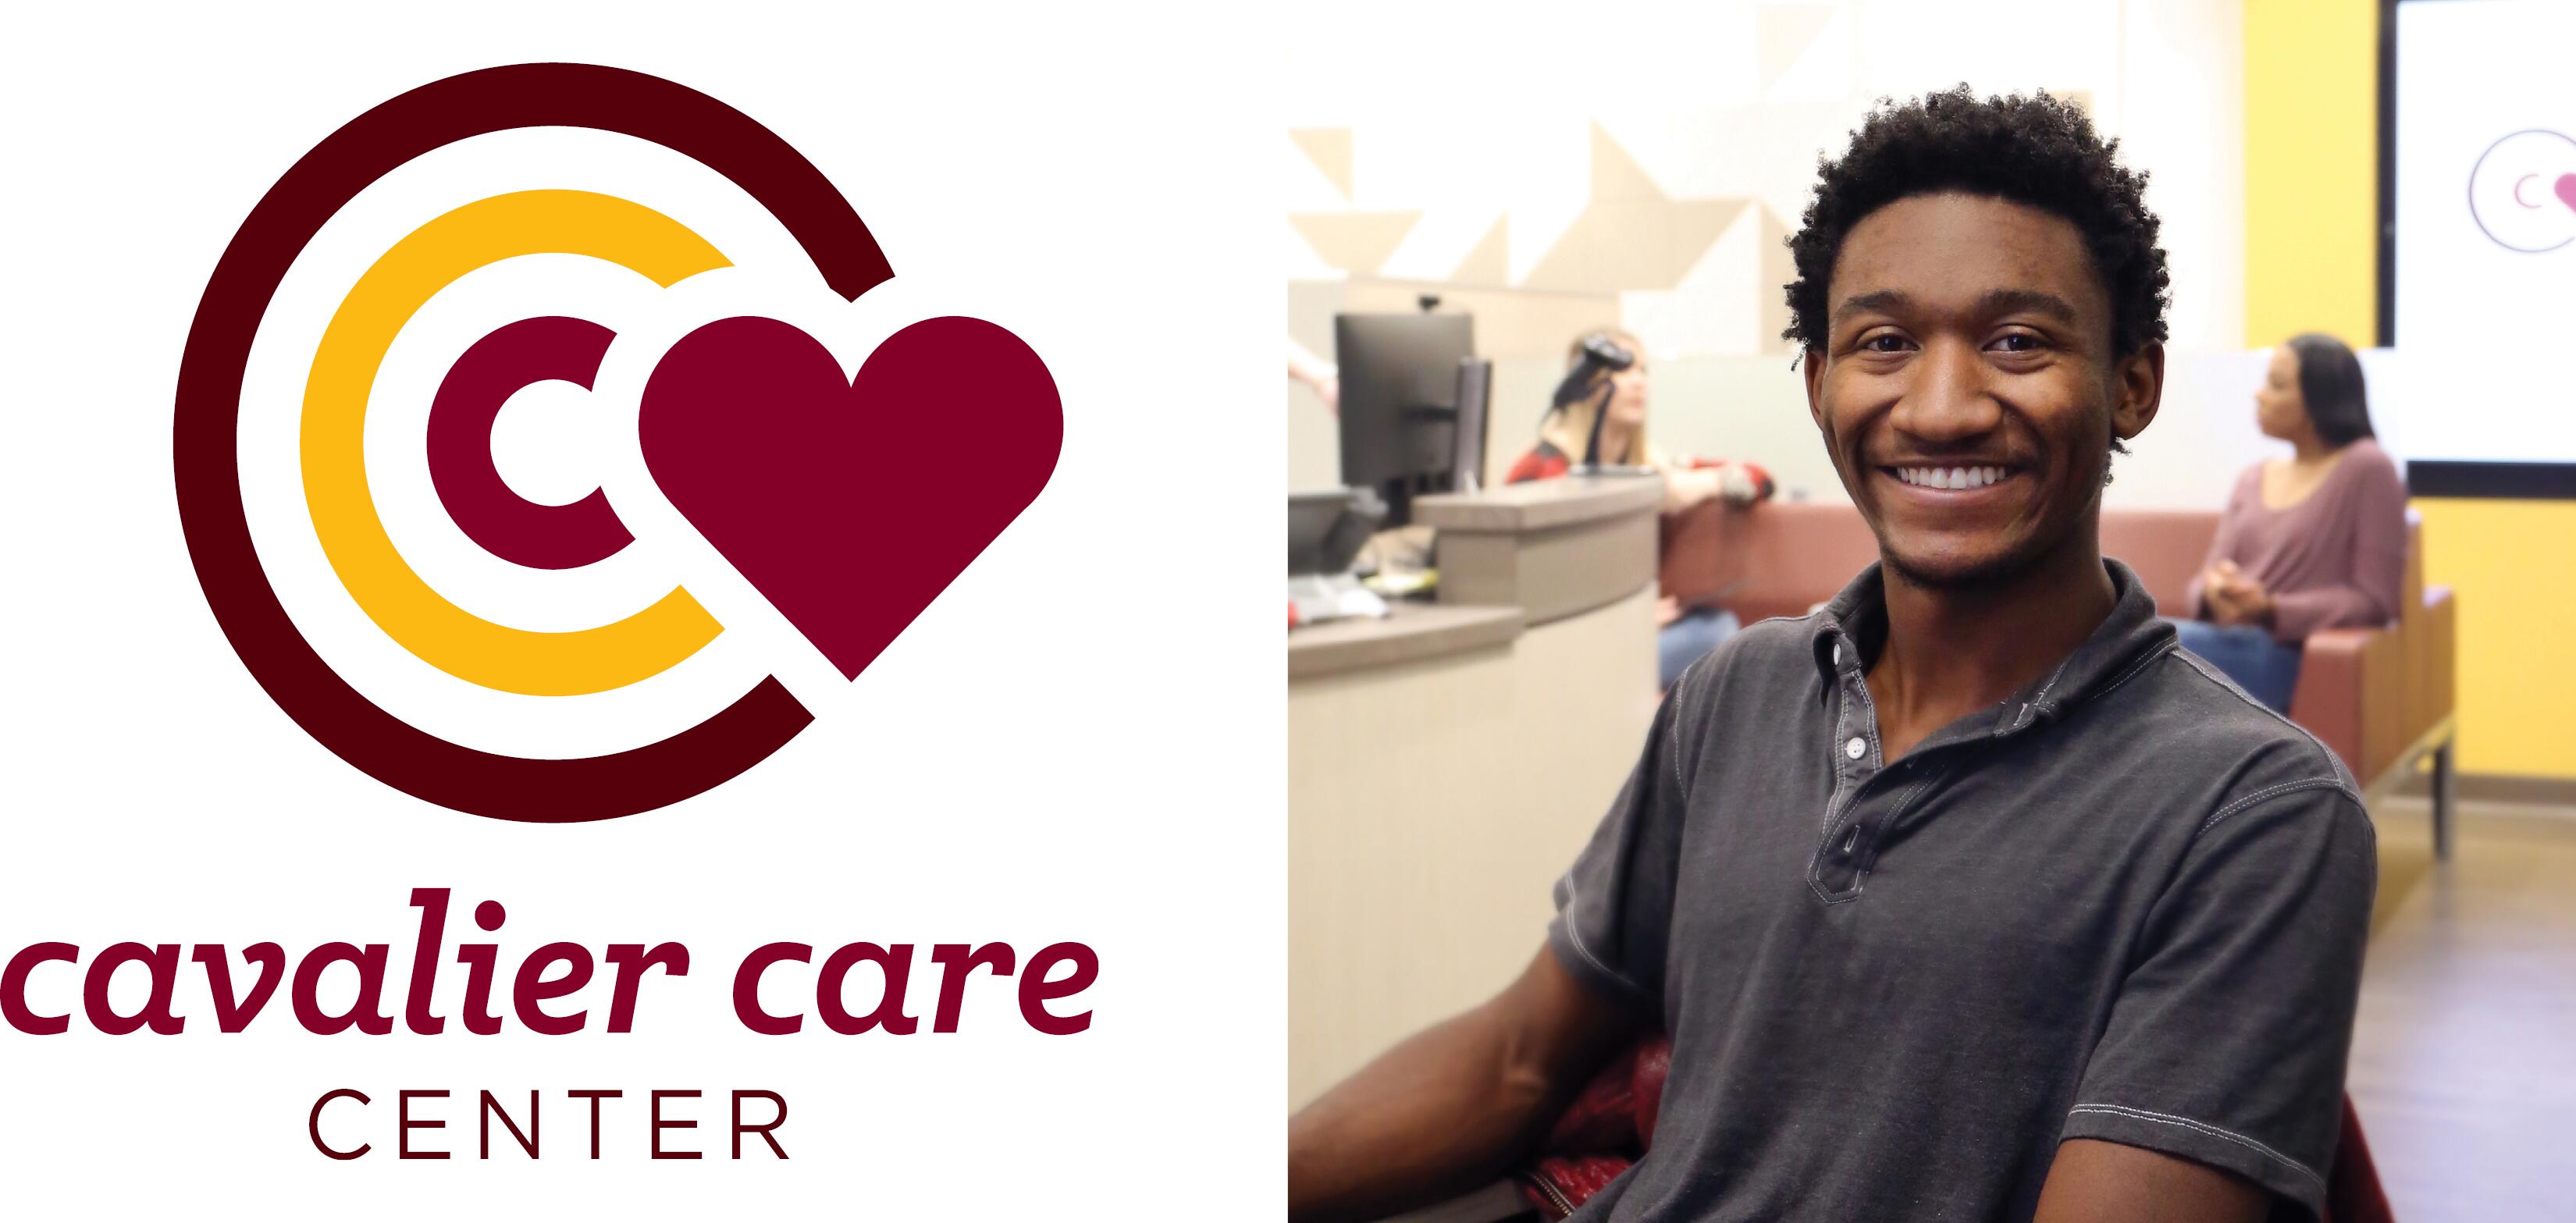 Cavalier Care Center Logo and Student